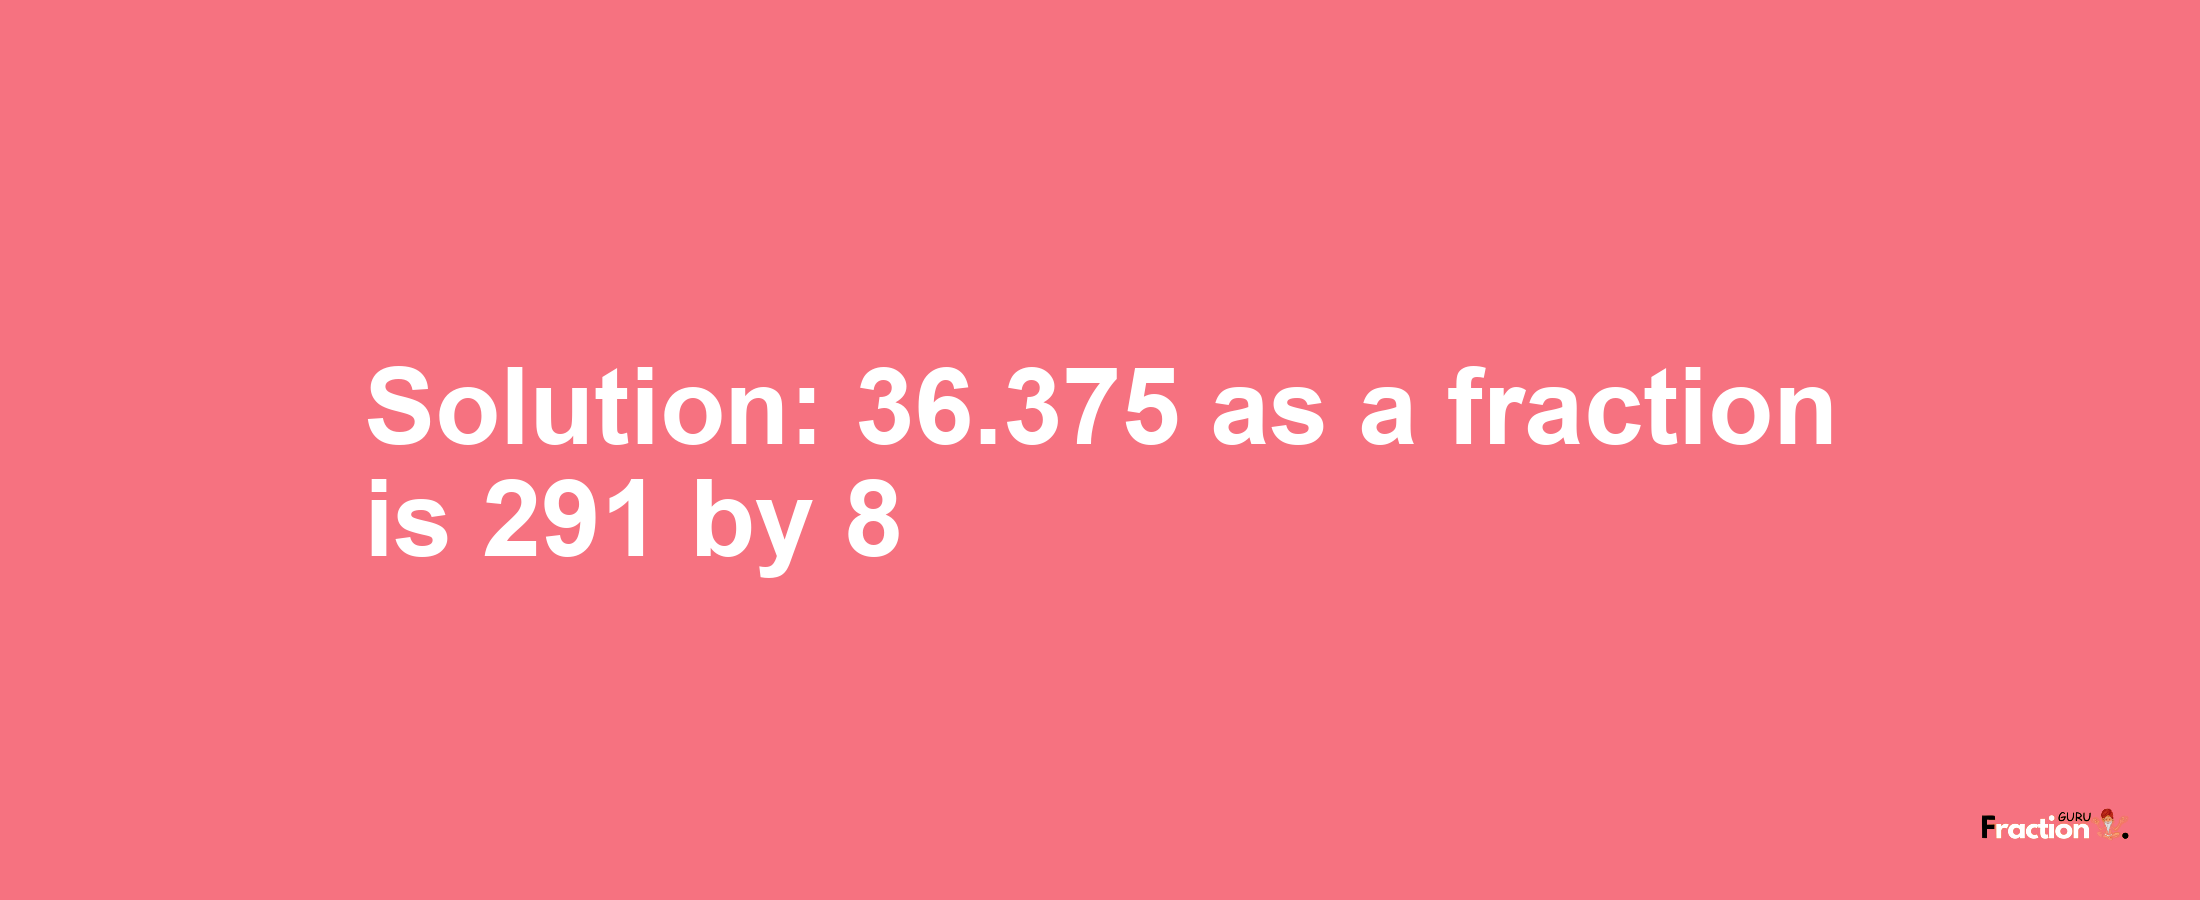 Solution:36.375 as a fraction is 291/8